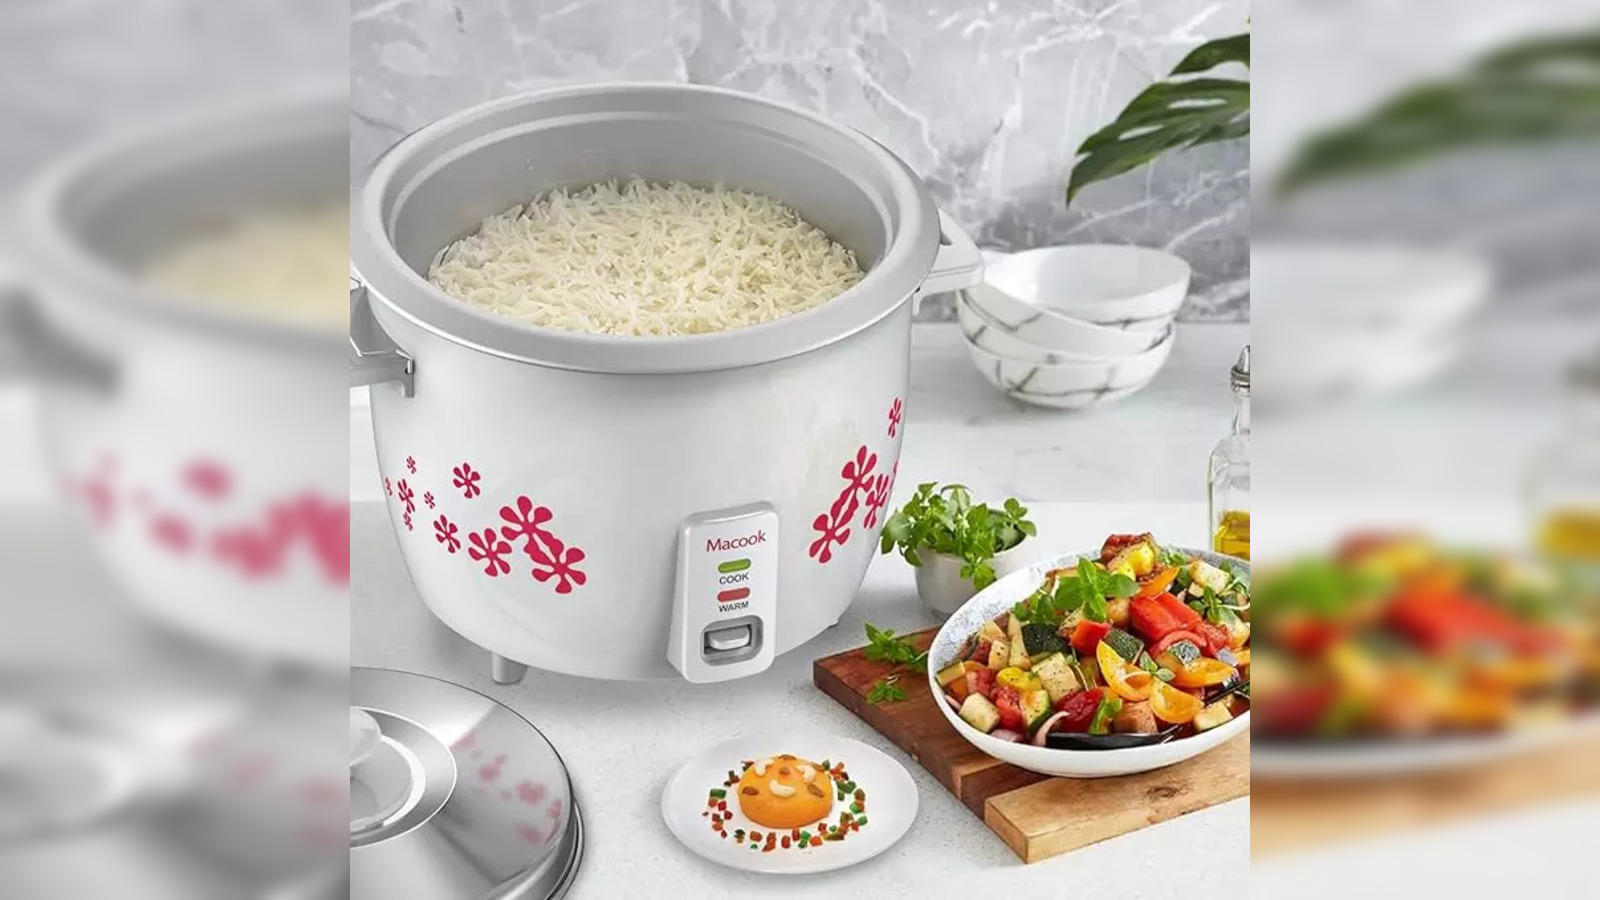 Will an expensive rice cooker make rice tastier? 